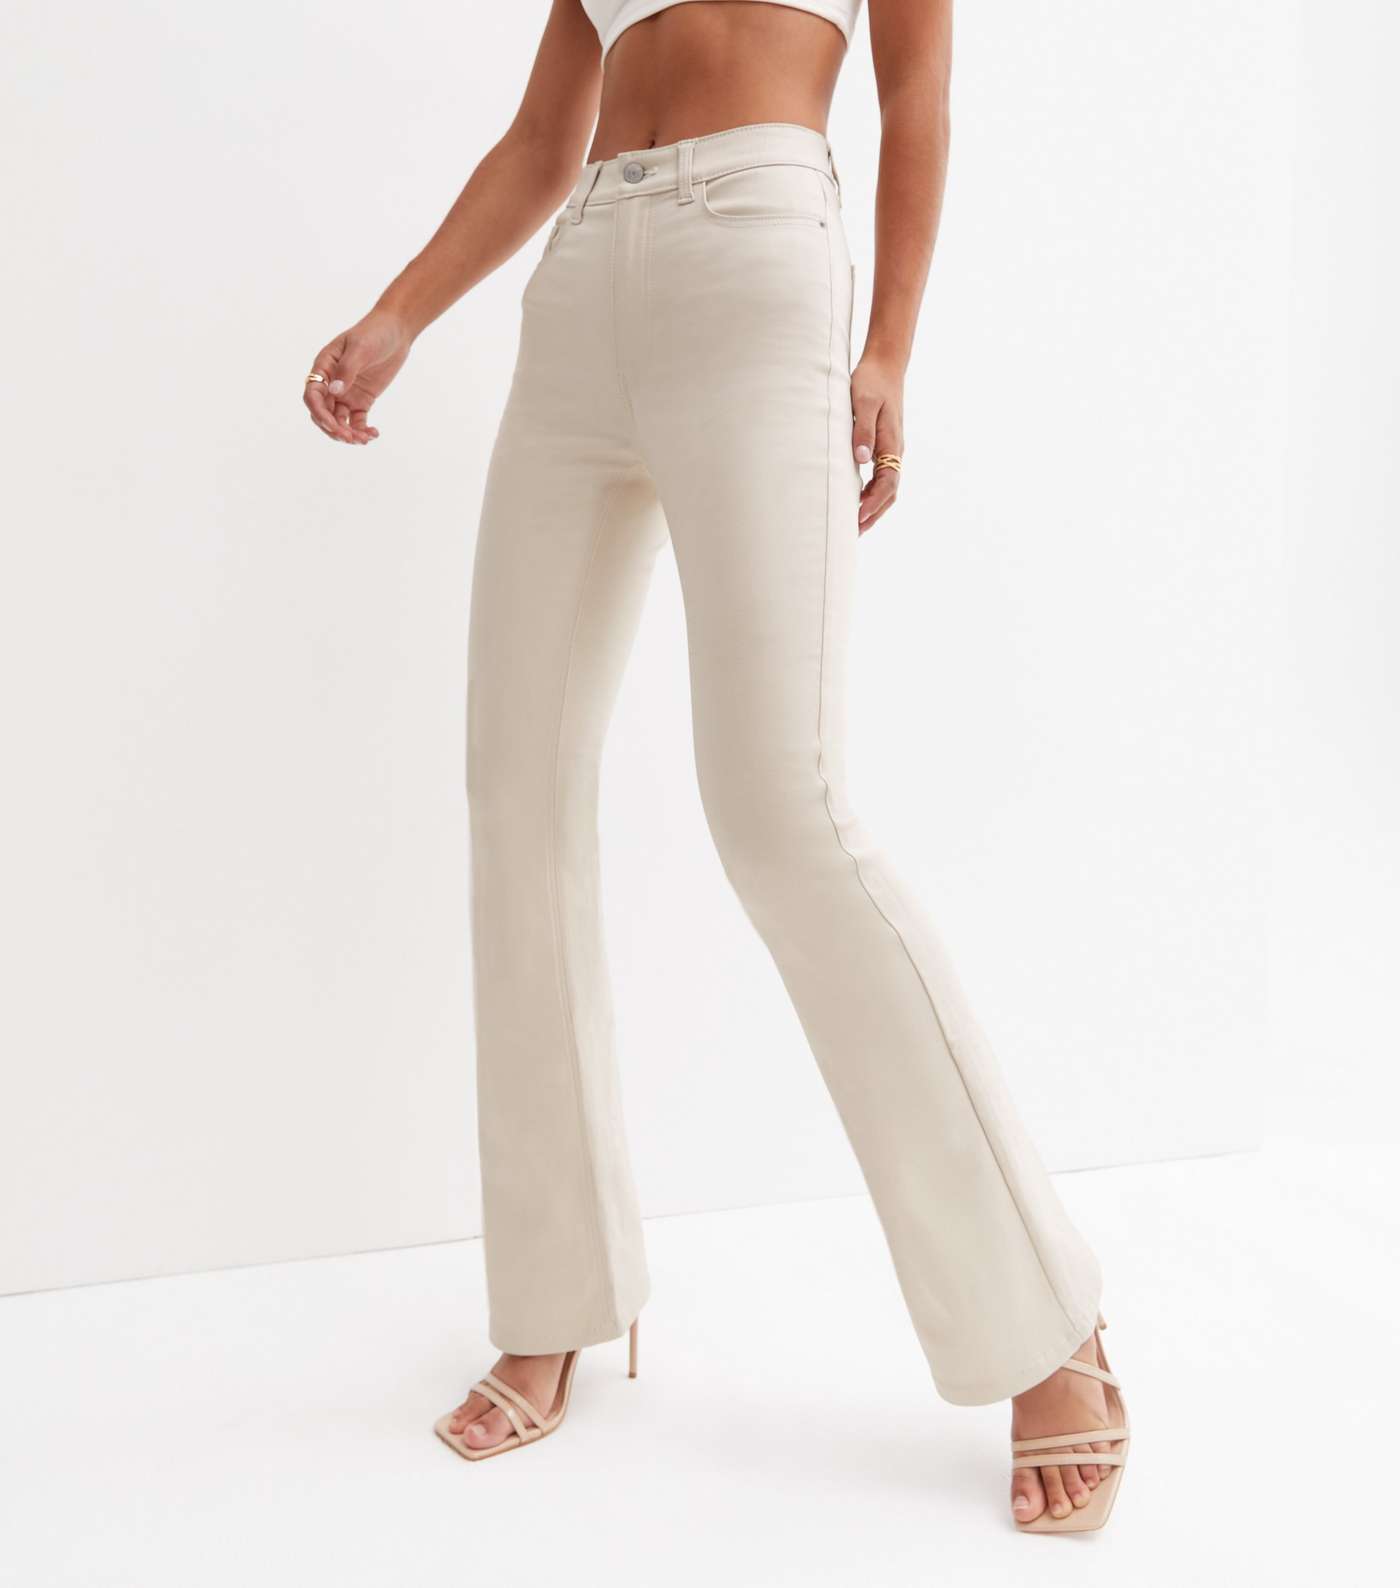 Off White Coated Leather-Look High Waist Flared Brooke Jeans Image 5